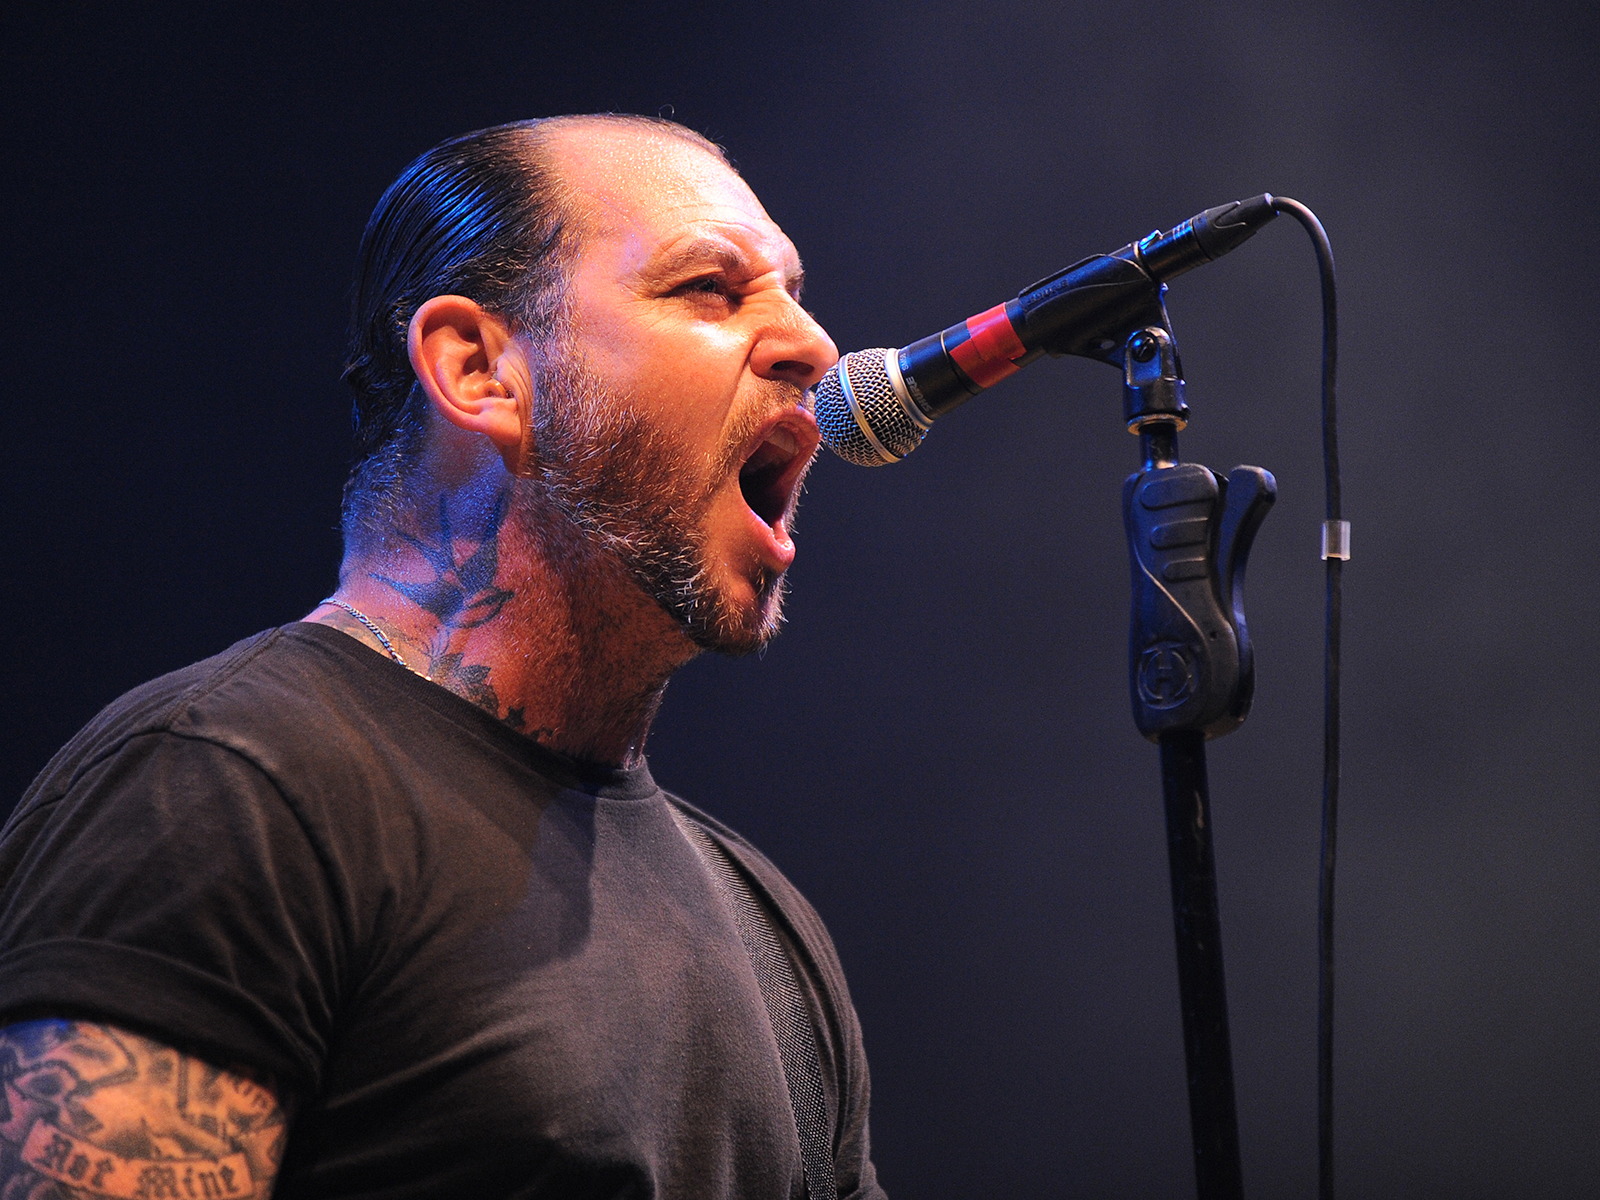 The Story Goes On: Social Distortion’s Mike Ness Teases New Record ahead of Tour